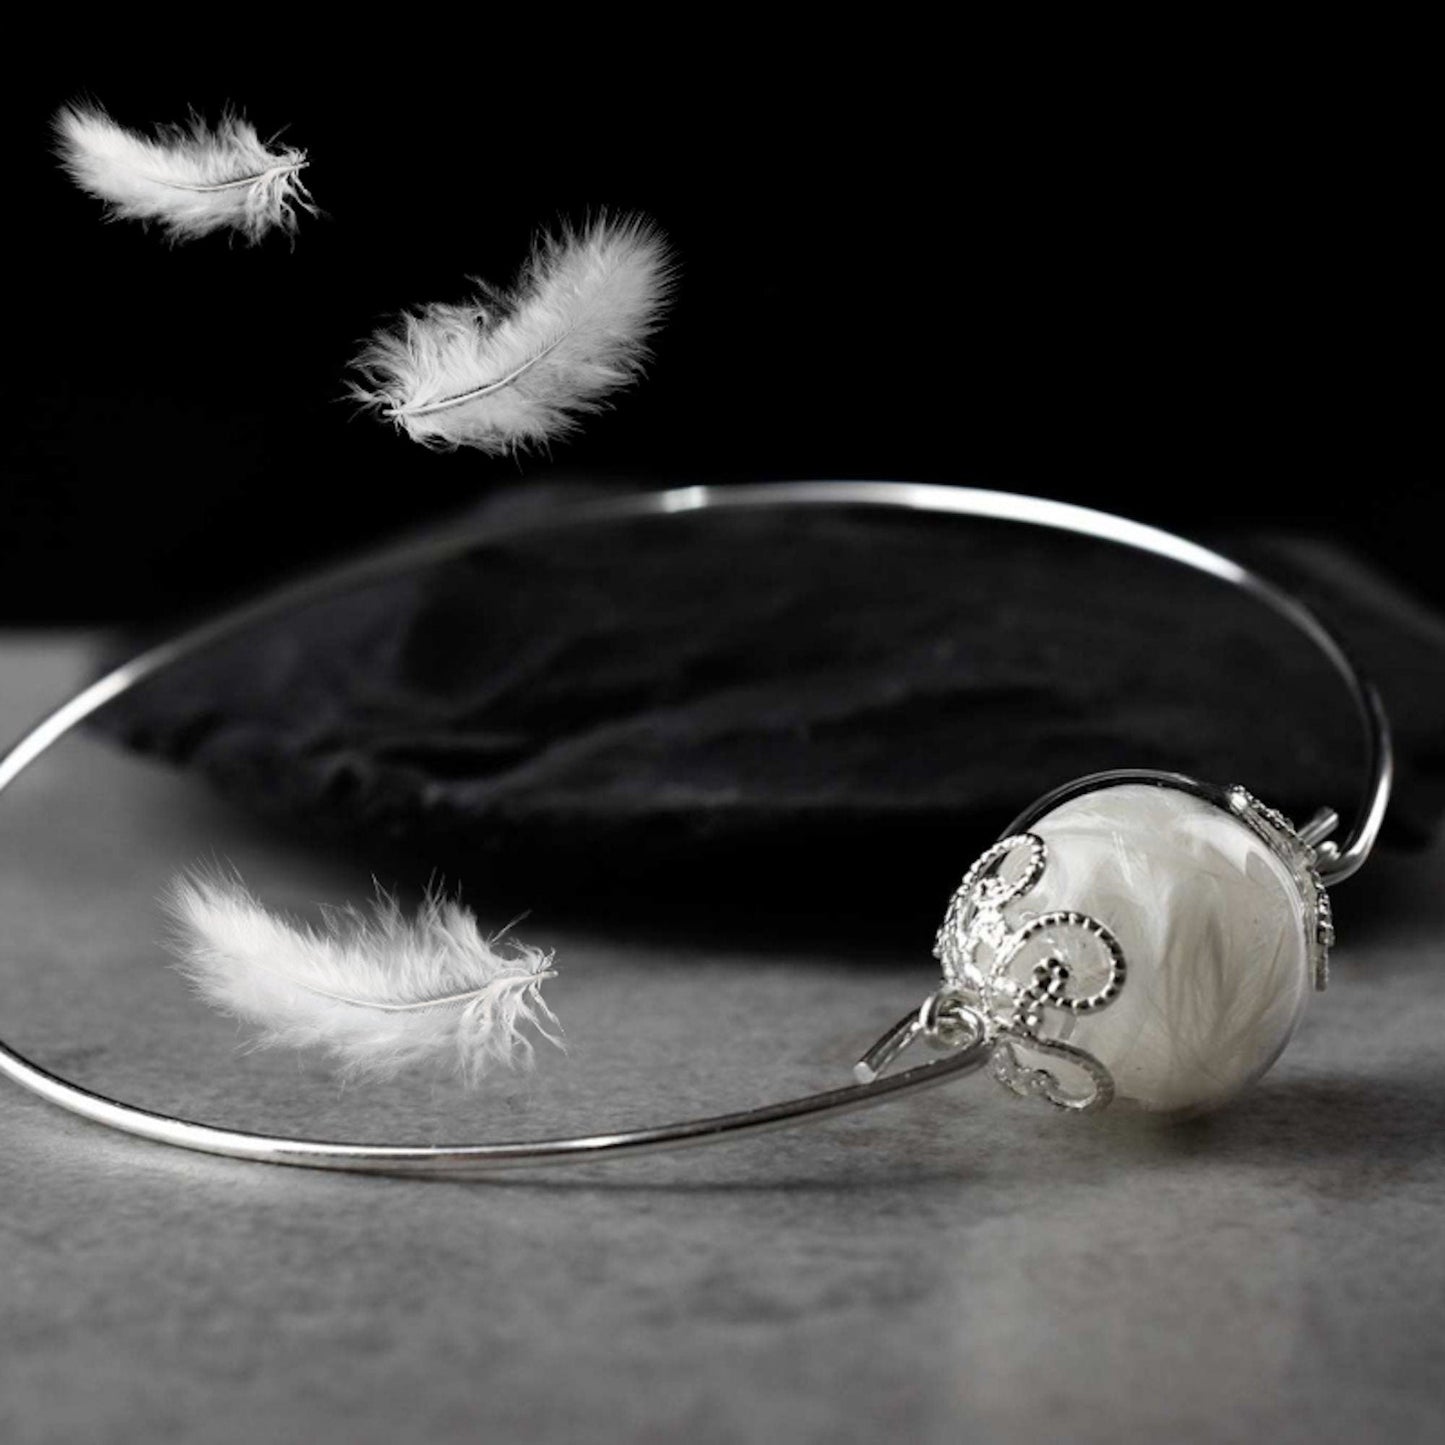 Bangle with real feathers - angel wings jewelry - Retarm-11